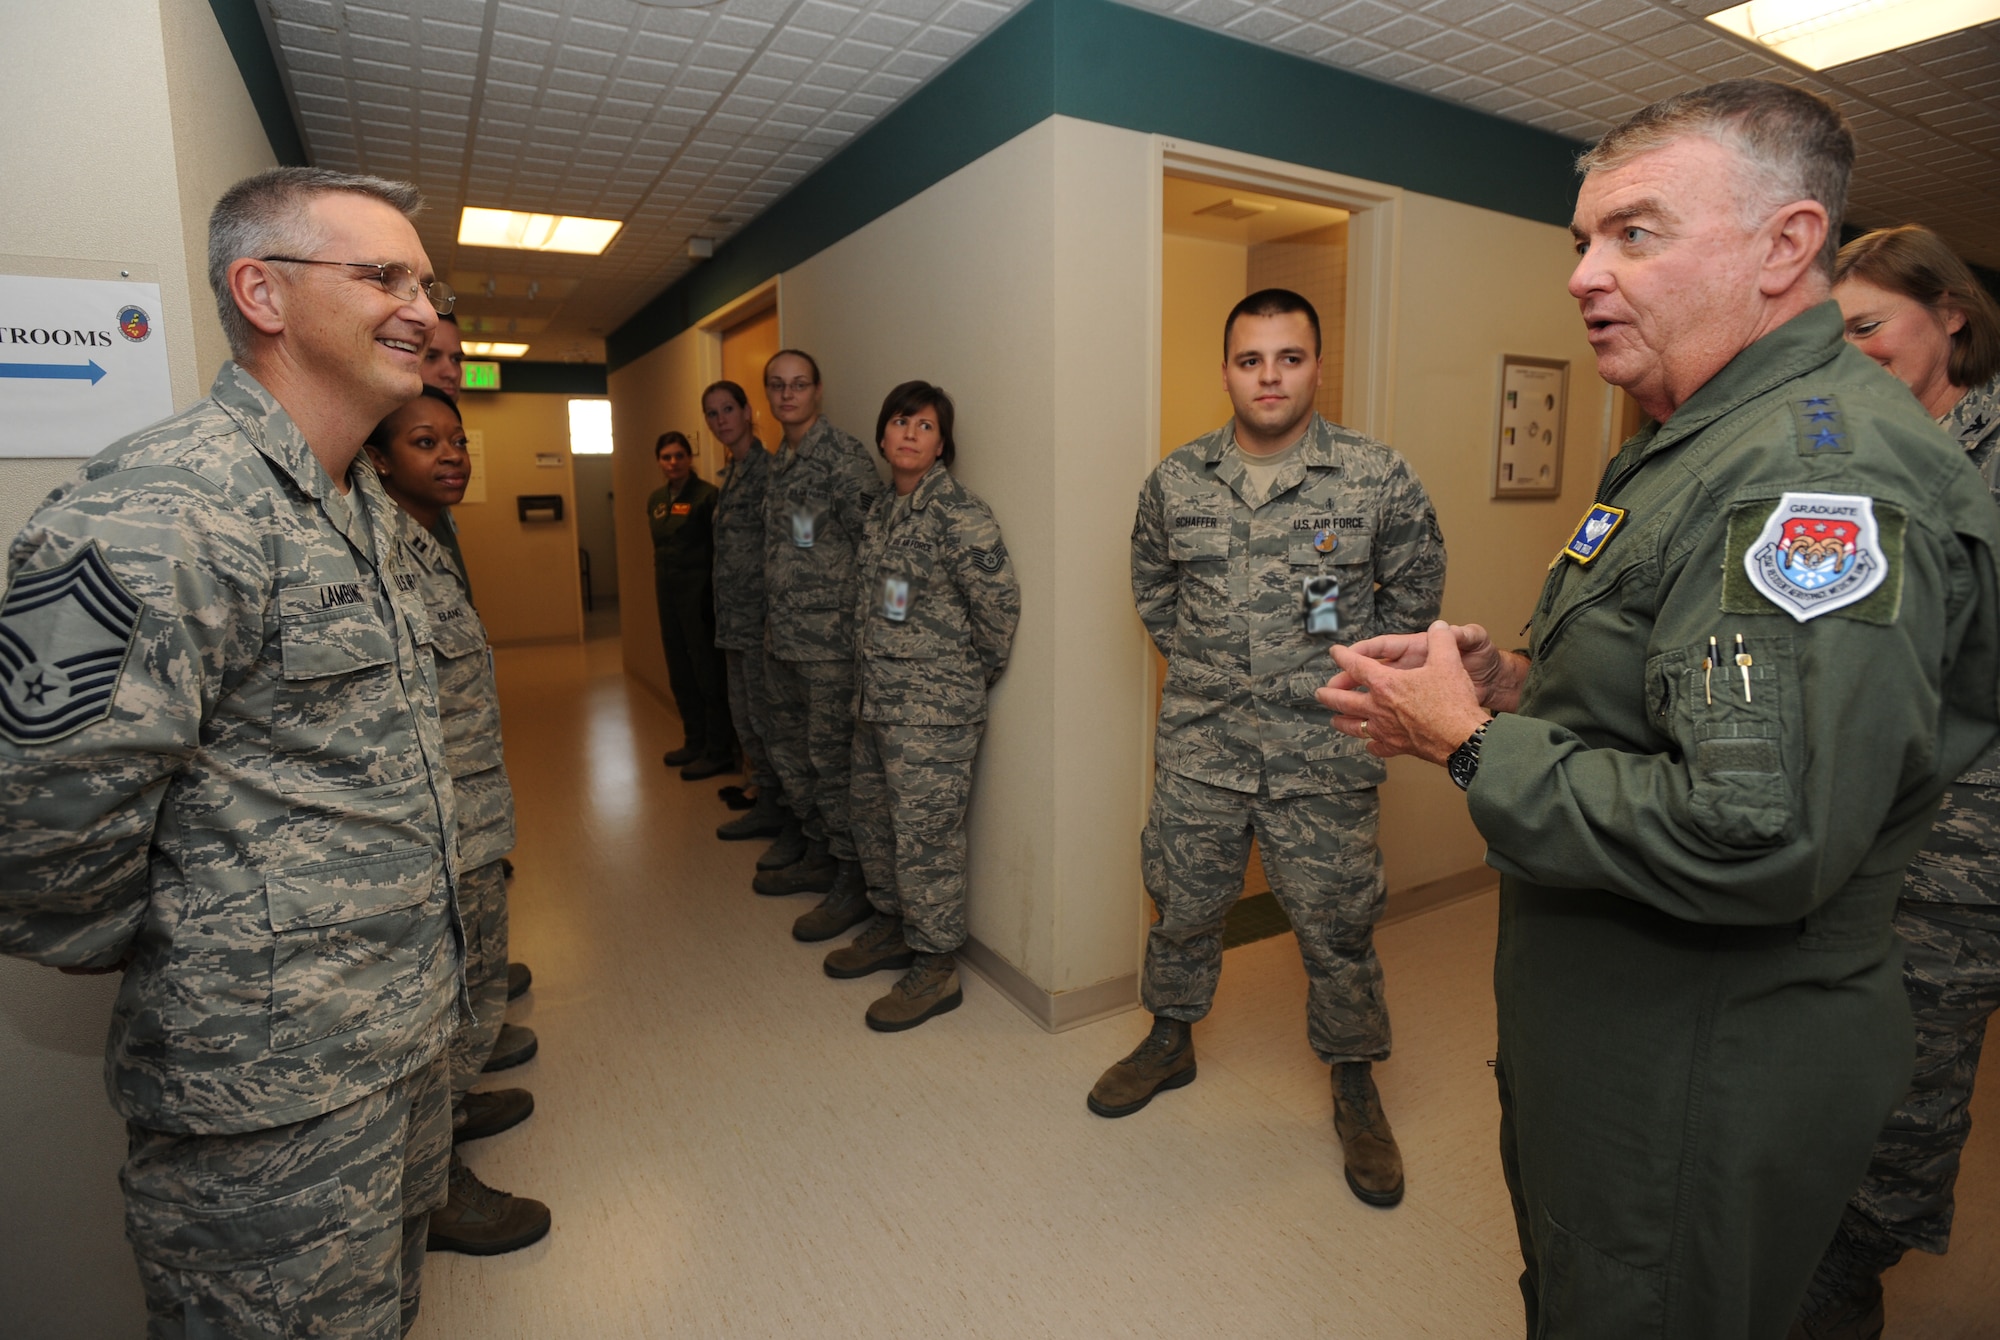 MINOT AIR FORCE BASE, N.D. -- Lt. Gen. Thomas W. Travis, U.S. Air Force Surgeon General and Chief Master Sgt. Kevin Lambing, Chief, Medical Enlisted Force, meet with members of the 5th Medical Group's Flight Medicine to discuss unit readiness and bring to light any intricacies in their duties, Oct. 5. During his visit to Minot, the surgeon general learned about the complexities of the Personnel Reliability Program mission which involve more than 3,300 members here. He also had the opportunity to visit Airmen throughout the various units at the 5th MDG and learn about the mission they execute on a daily basis at Minot Air Force Base. (U.S. Air Force photo/Senior Airman Jose L. Hernandez) 